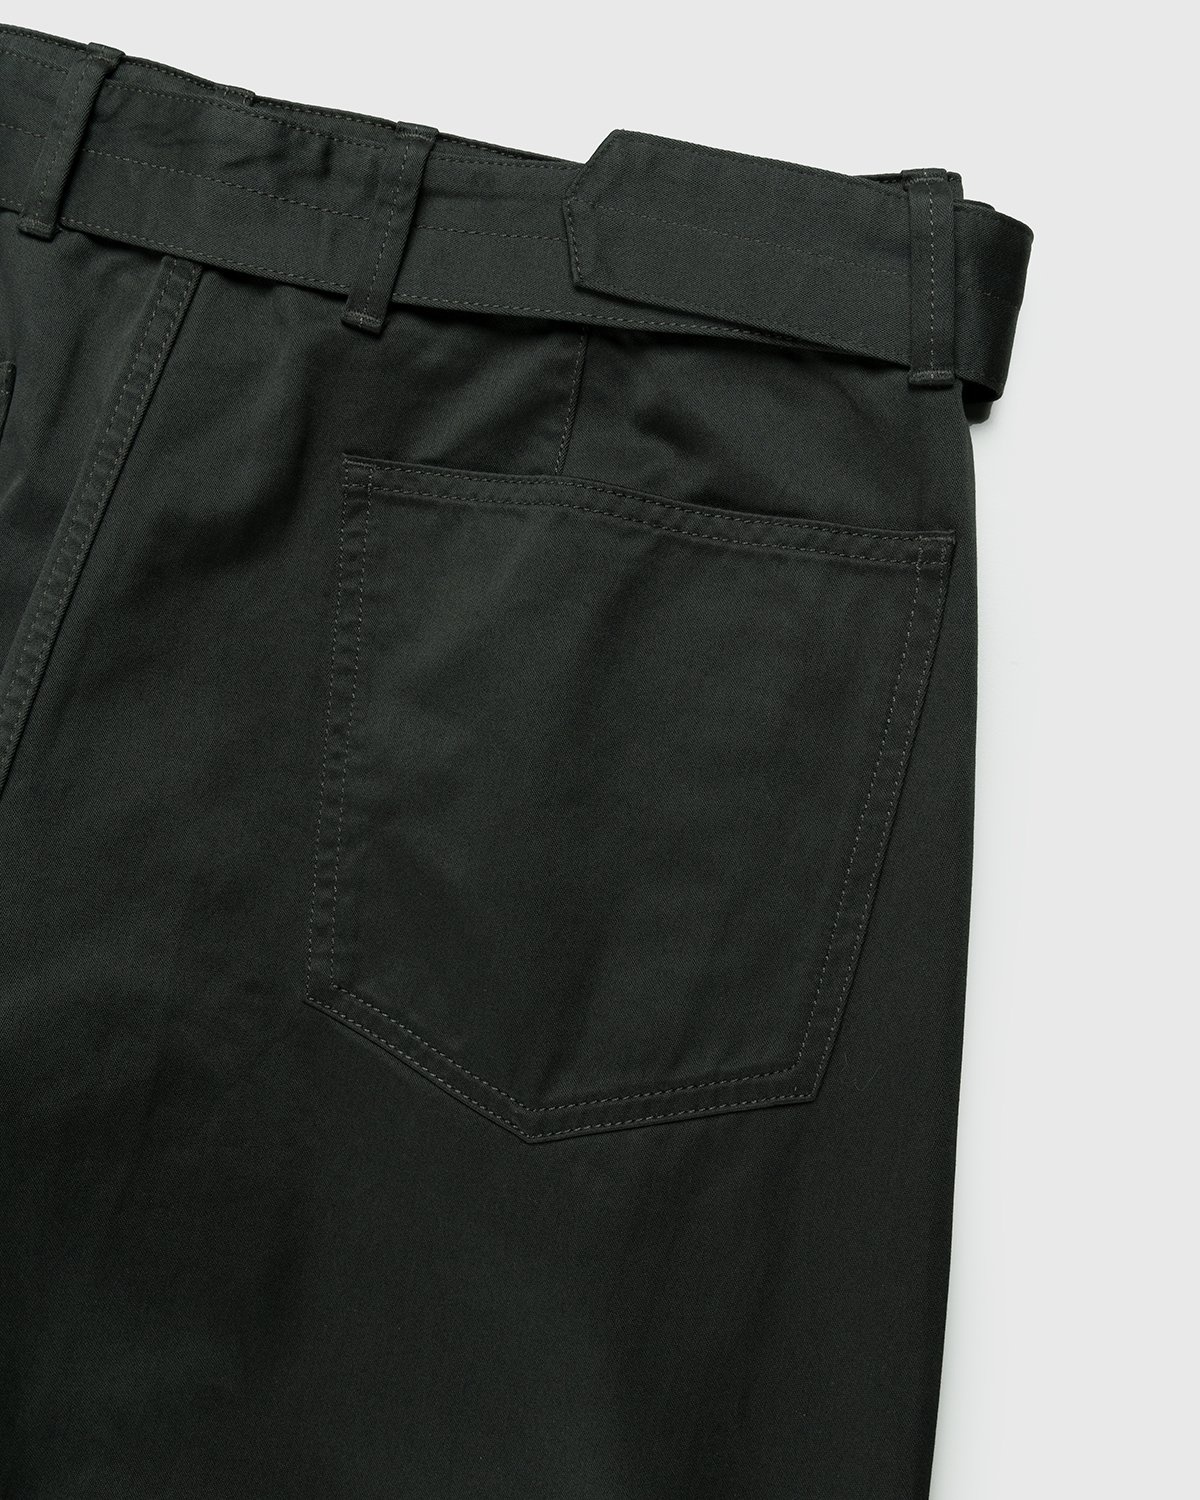 Lemaire – Twisted Belted Pants Dark Slate Green - Trousers - Grey - Image 3